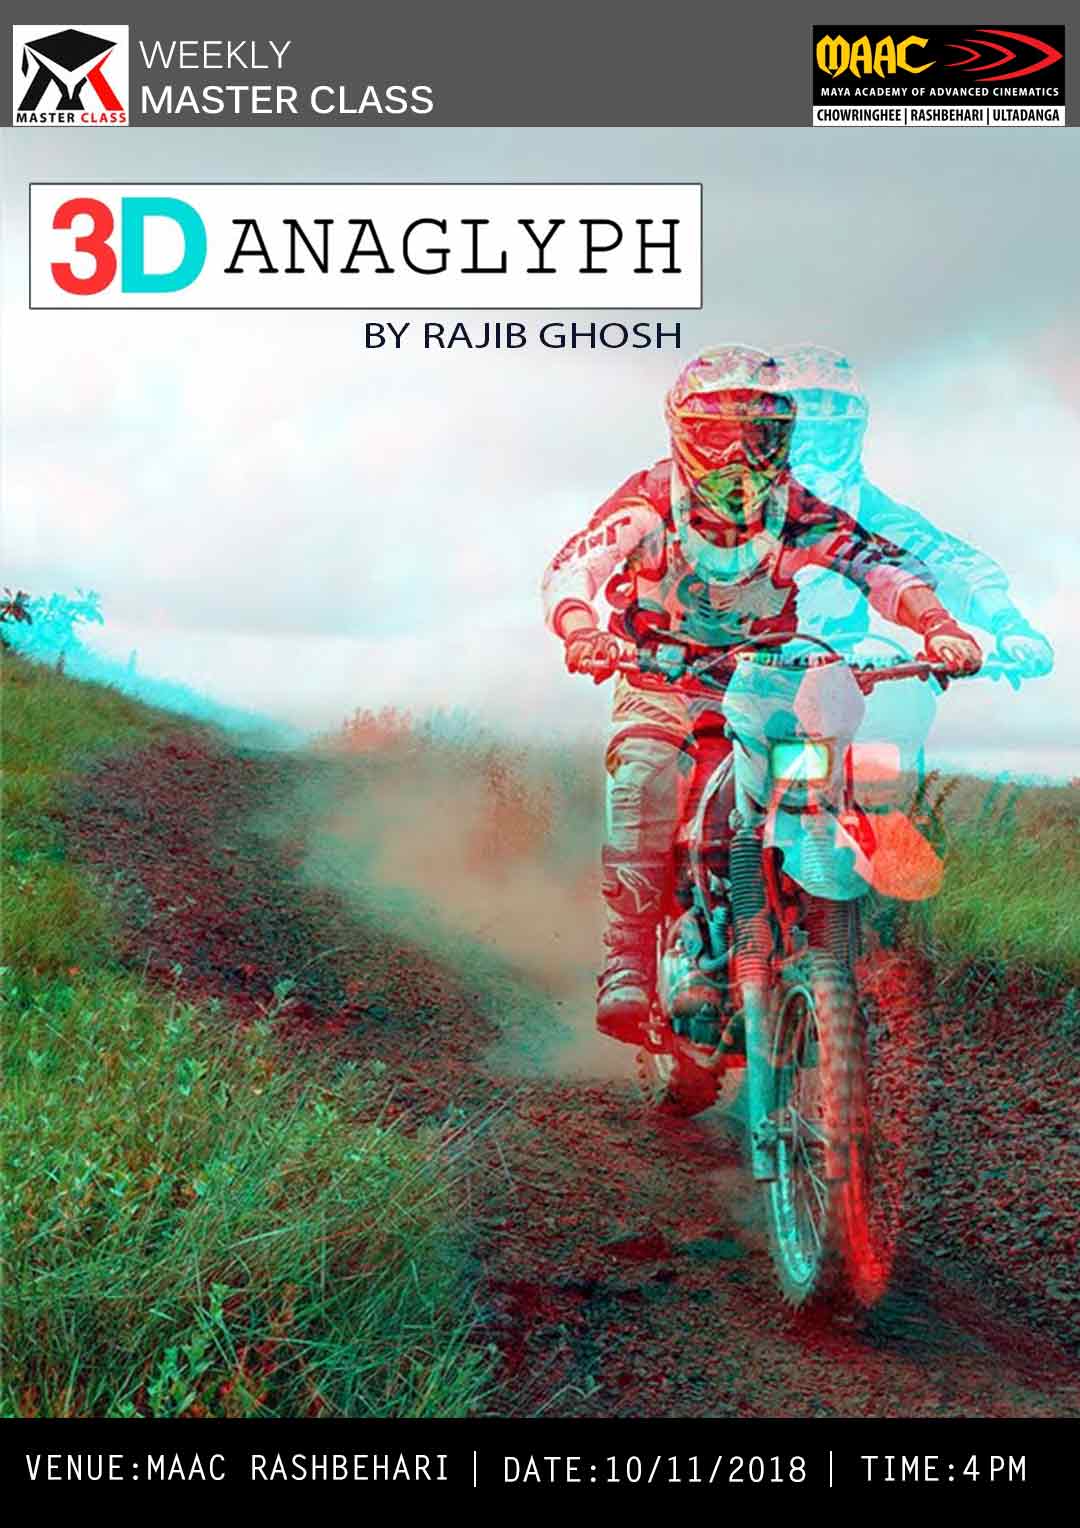 Weekly Master Class on 3D Anaglyph